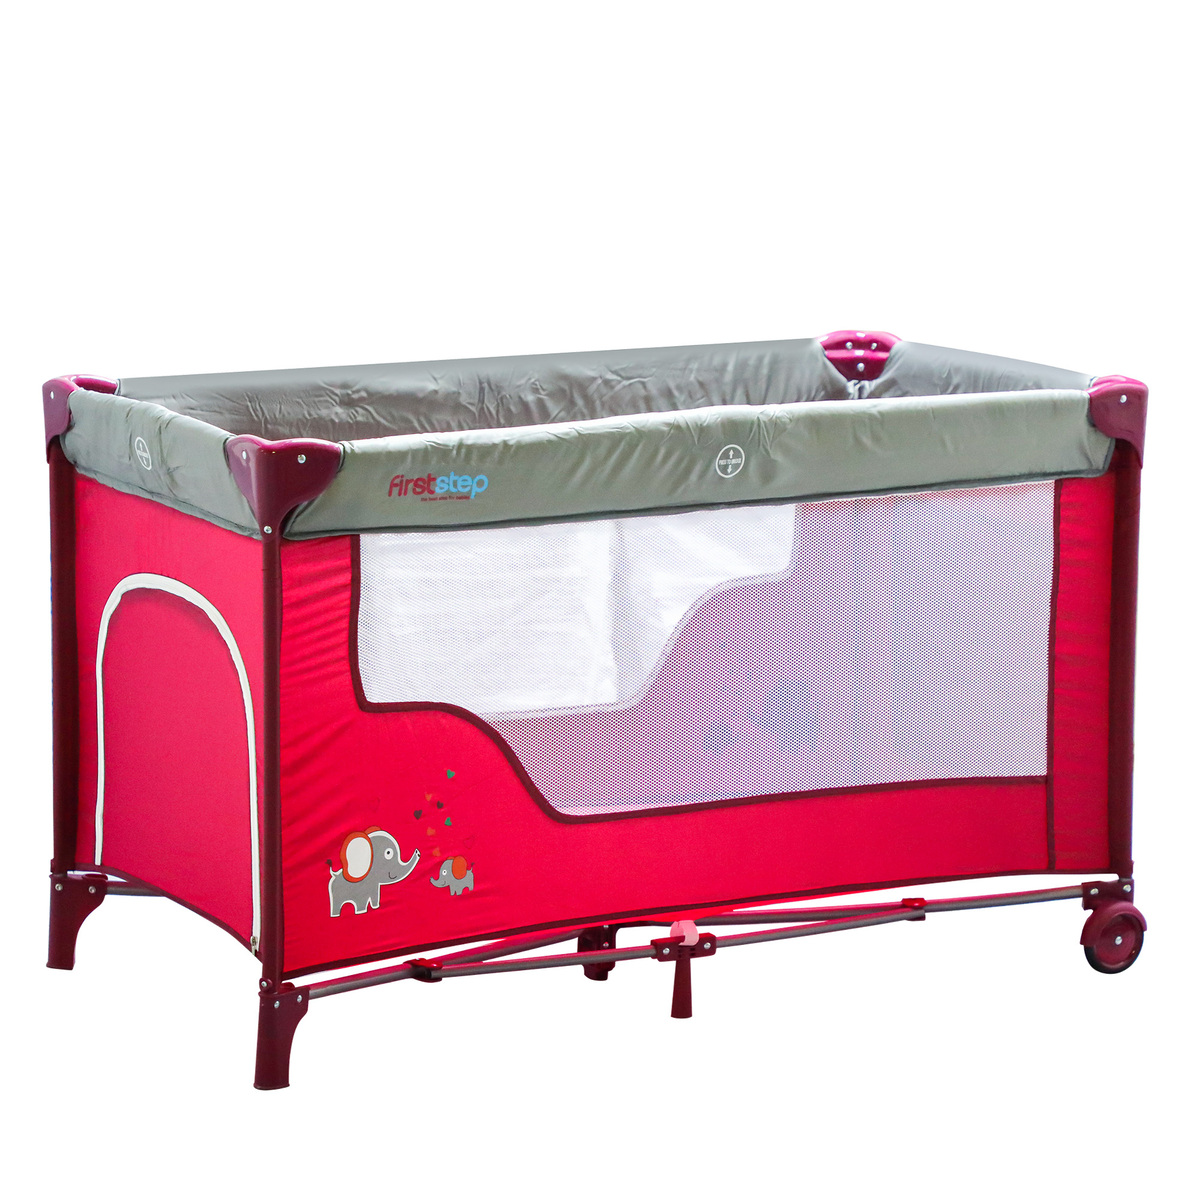 First Step Baby Play Pen P9010 Red